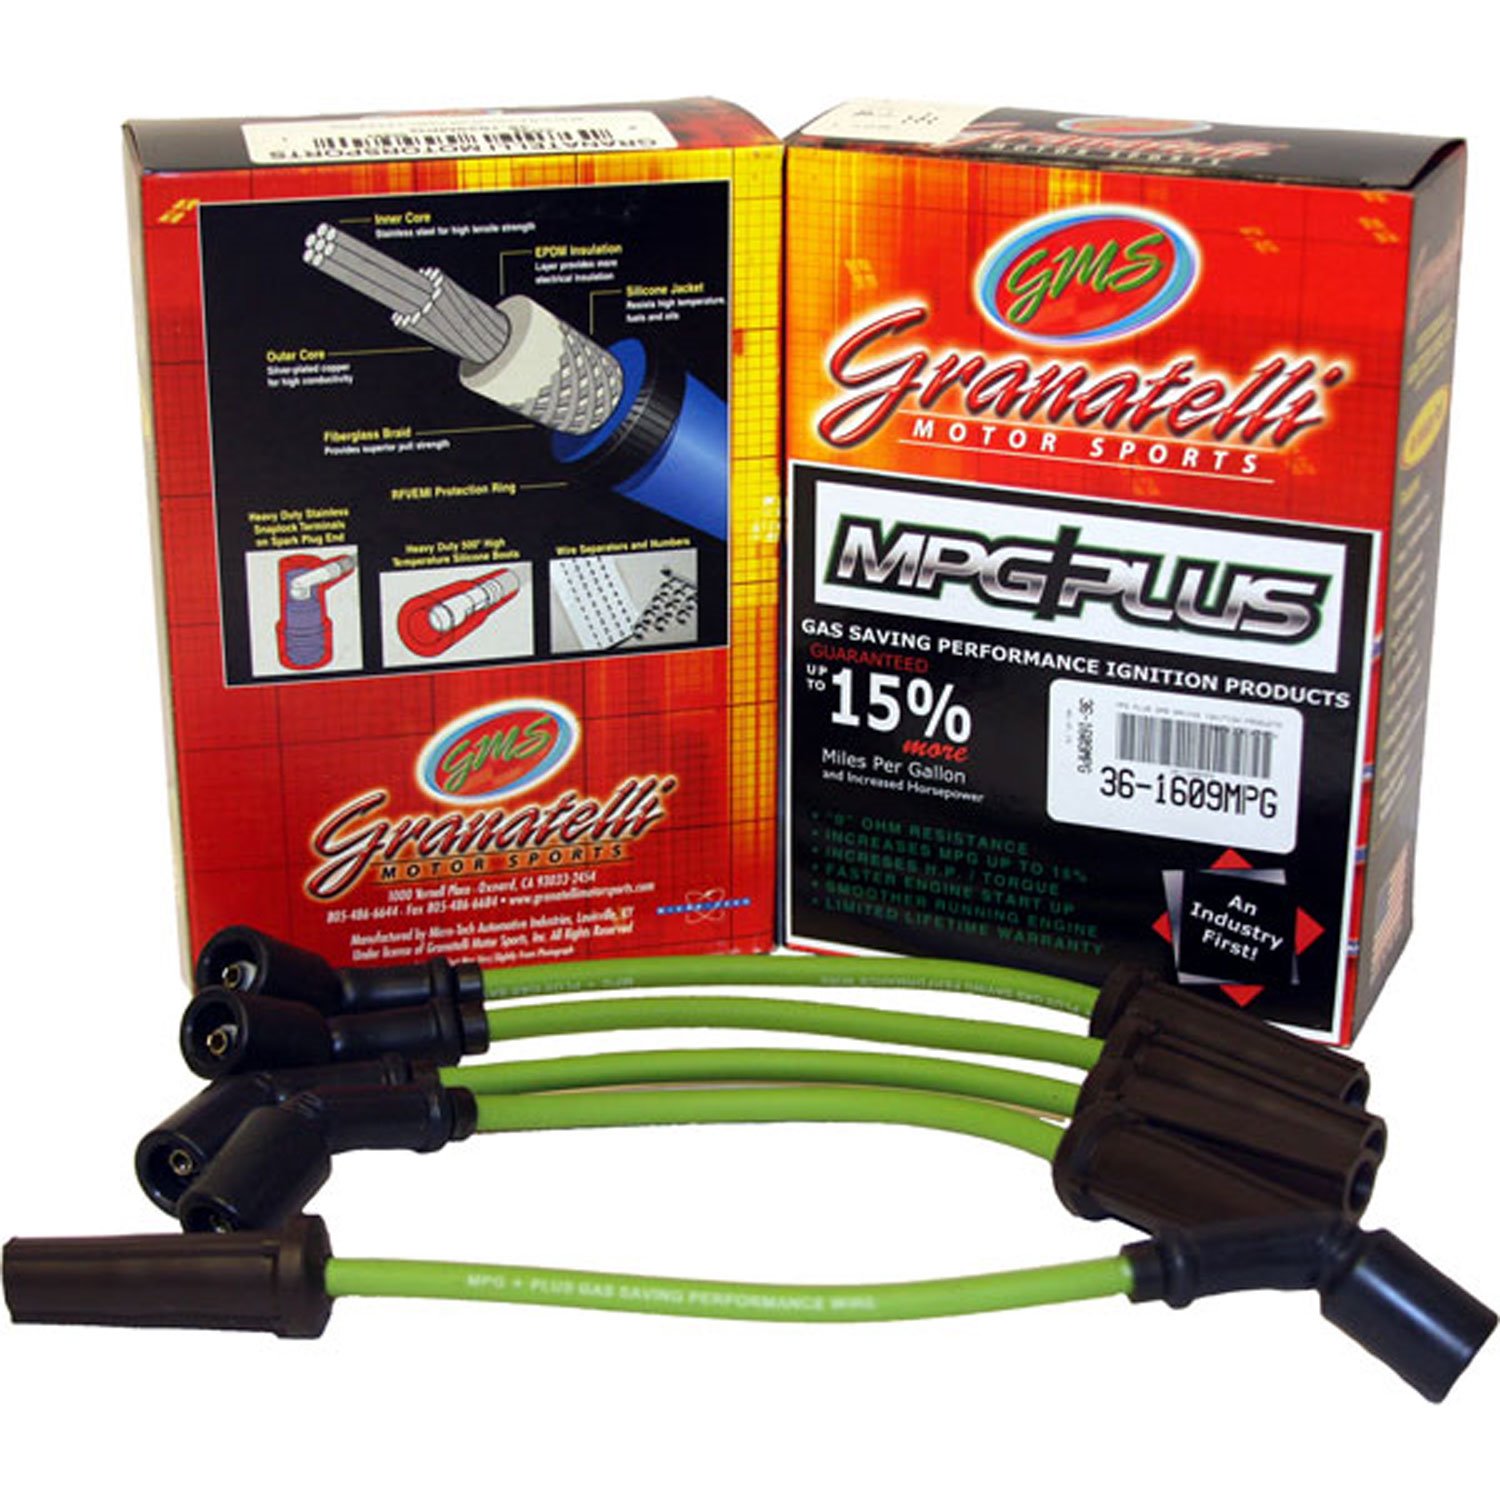 MPG Wires ACURA LEGEND 6CYL 2.5L 86-89